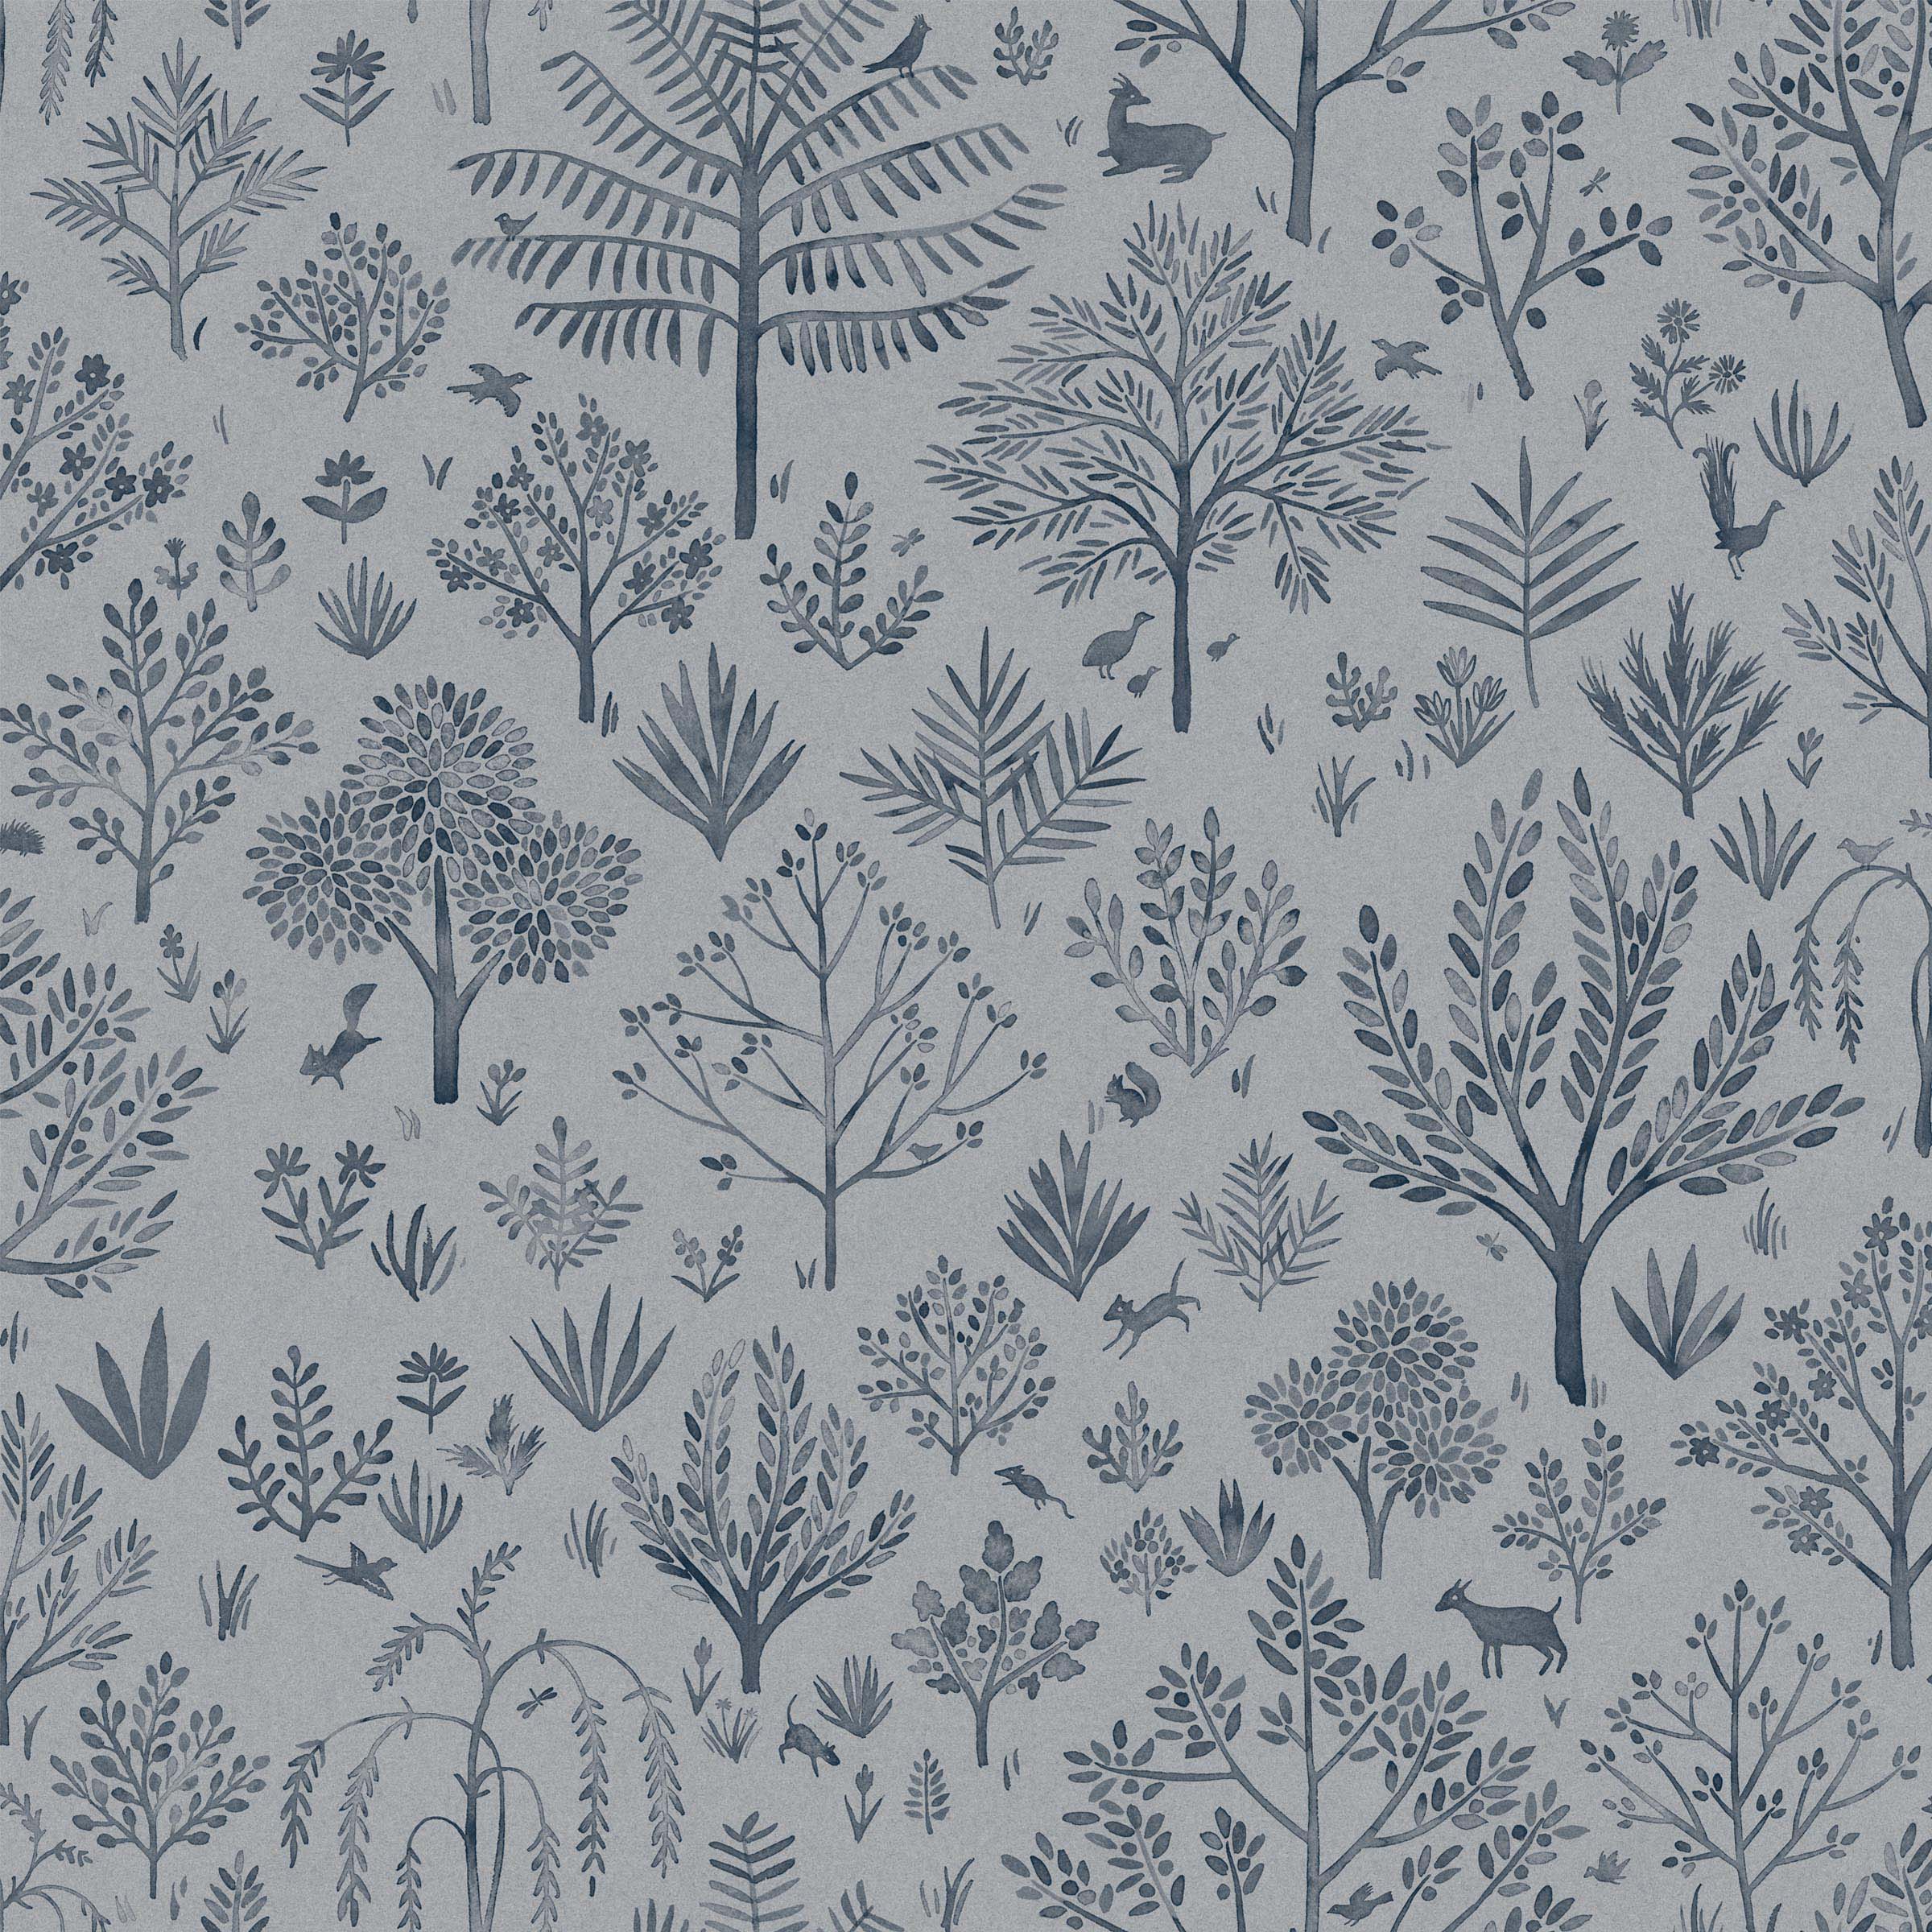 Detail of fabric in a playful animal and tree print in navy on a blue-gray field.